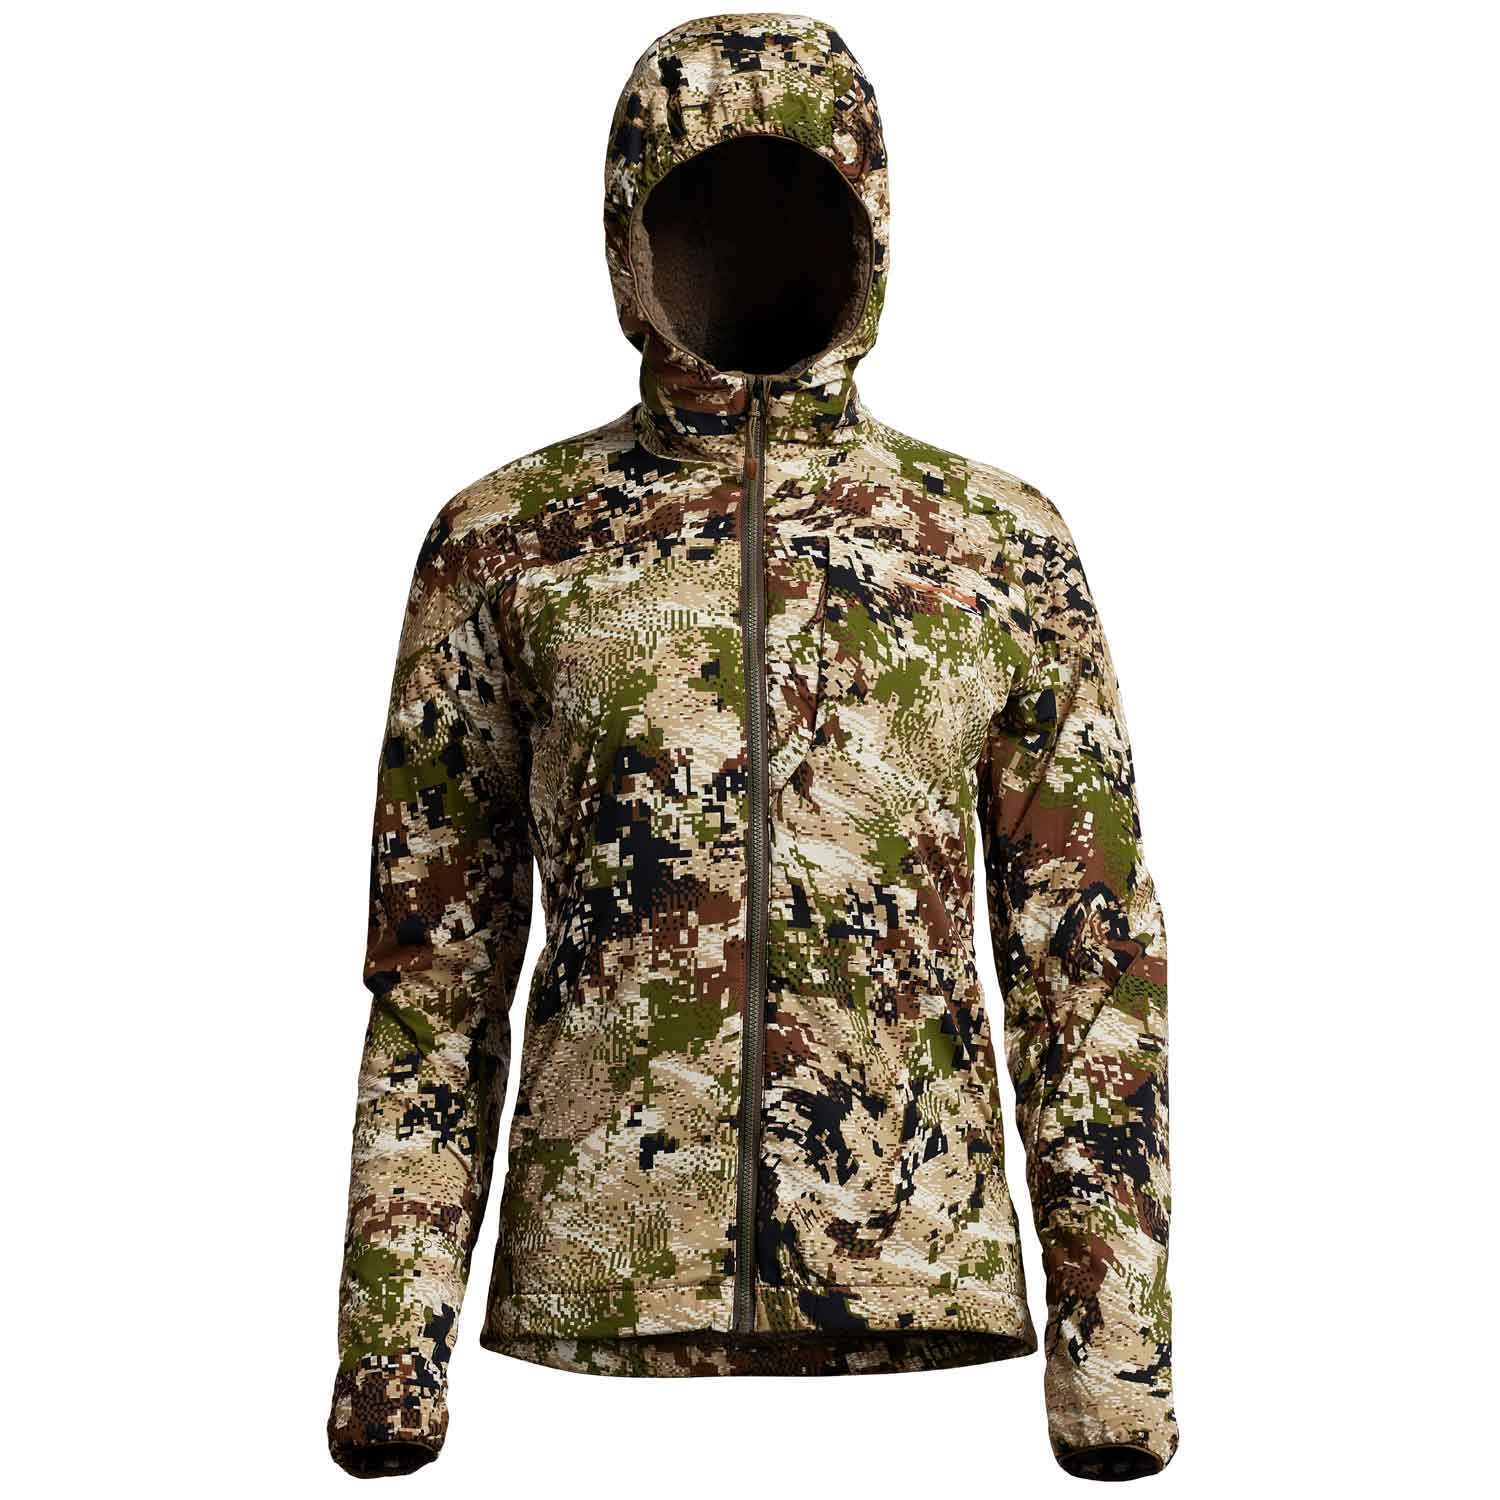 Outdoor Clothing - Men, Women, Youth Apparel